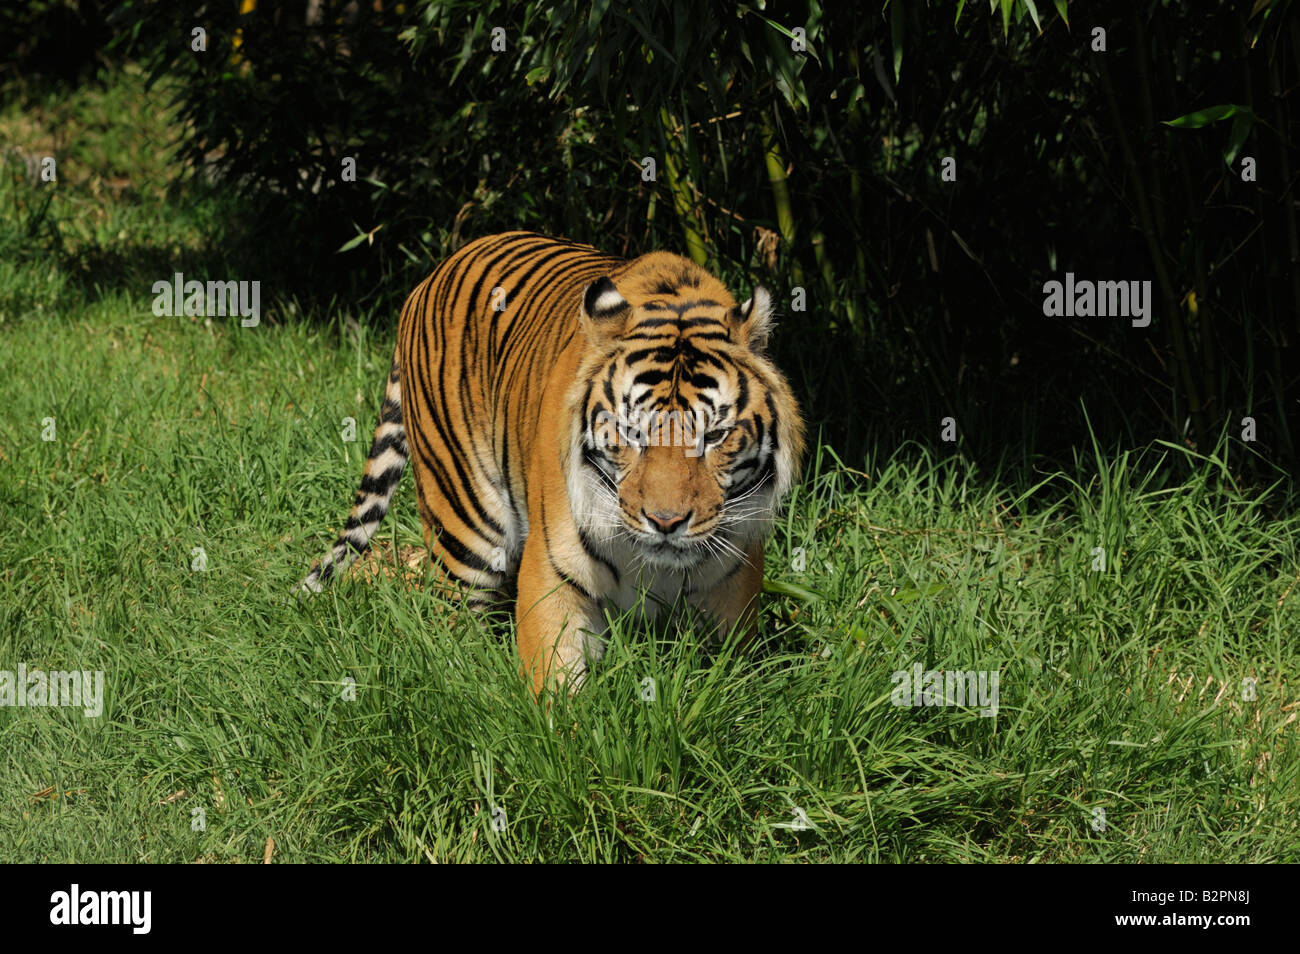 Bengal tiger Panthera tigris bengalensis is looking for something in the grass in front of dark bamboos Stock Photo